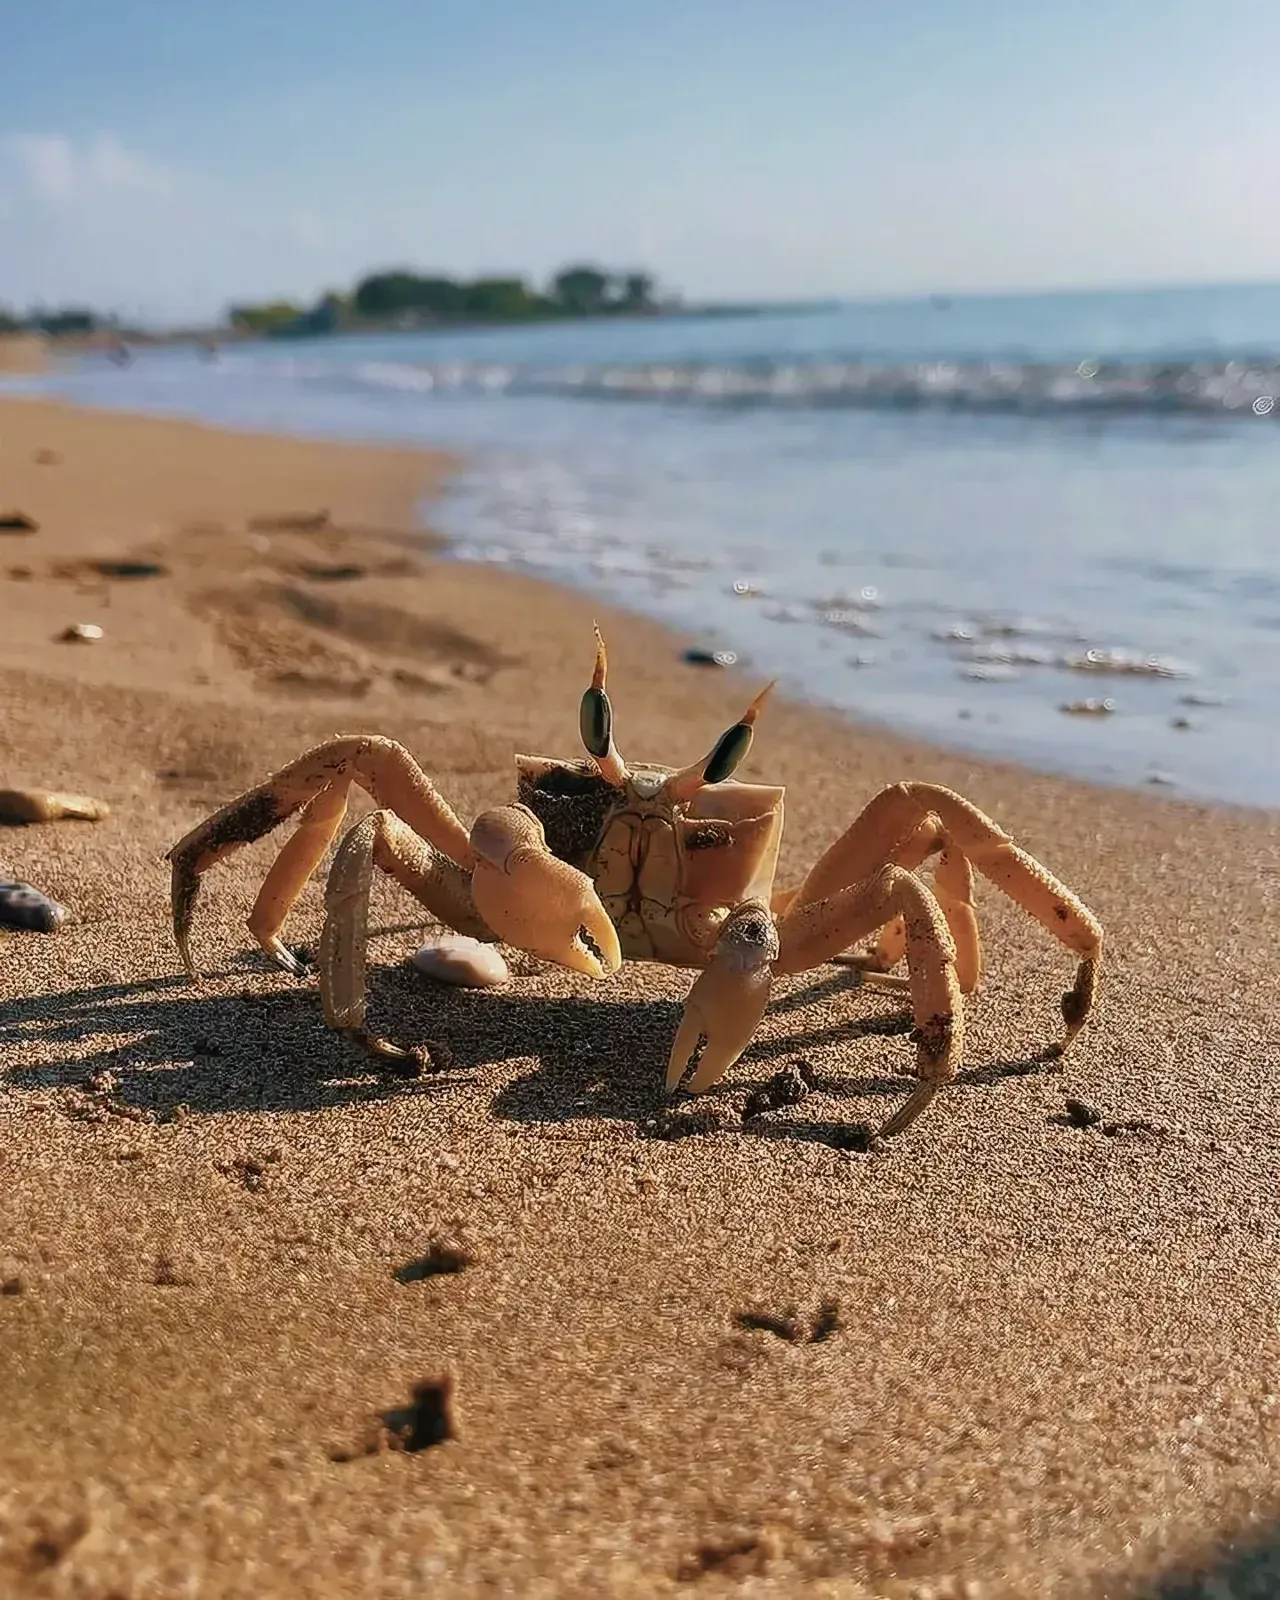 Fiddler crab on a sandy beach in Iskele, Northern Cyprus